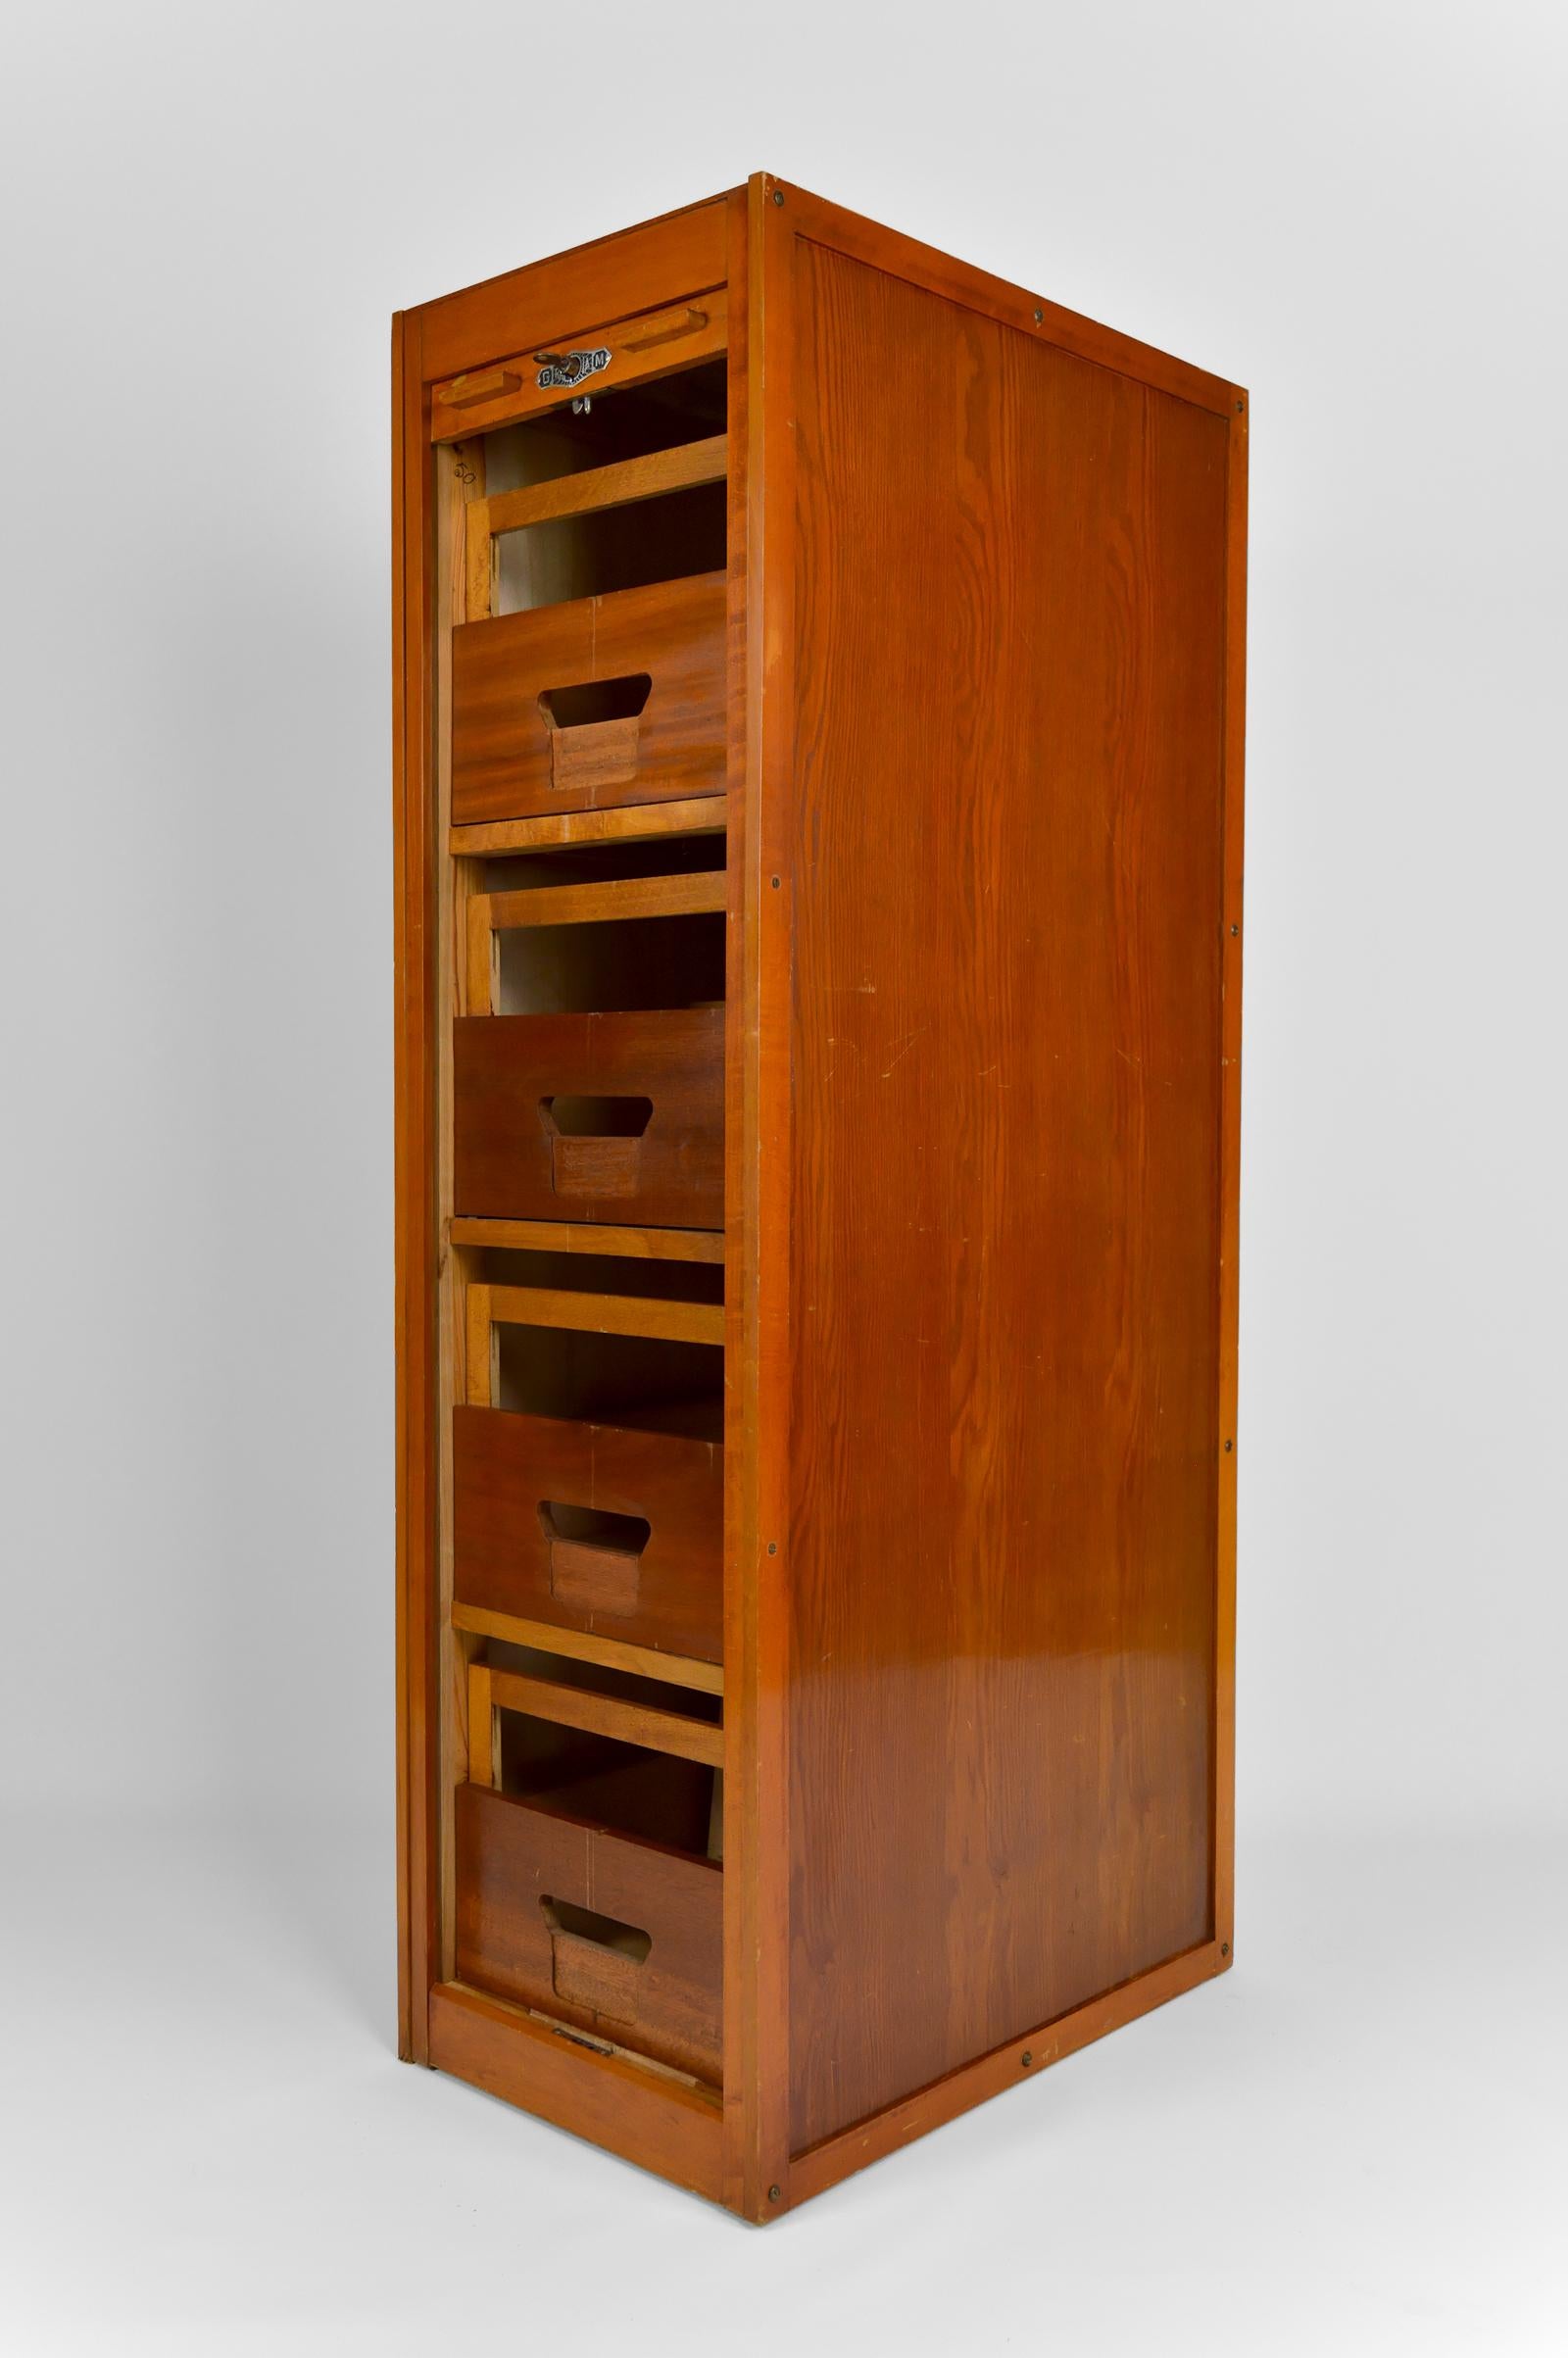 Cabinet in oak, composed of 4 drawers closing with a sliding curtain.
Each drawer has a vertical shelf serving as a separation and allowing the depth of the drawer to be adjusted.

Sorter / filing cabinet originally intended for storing archives,